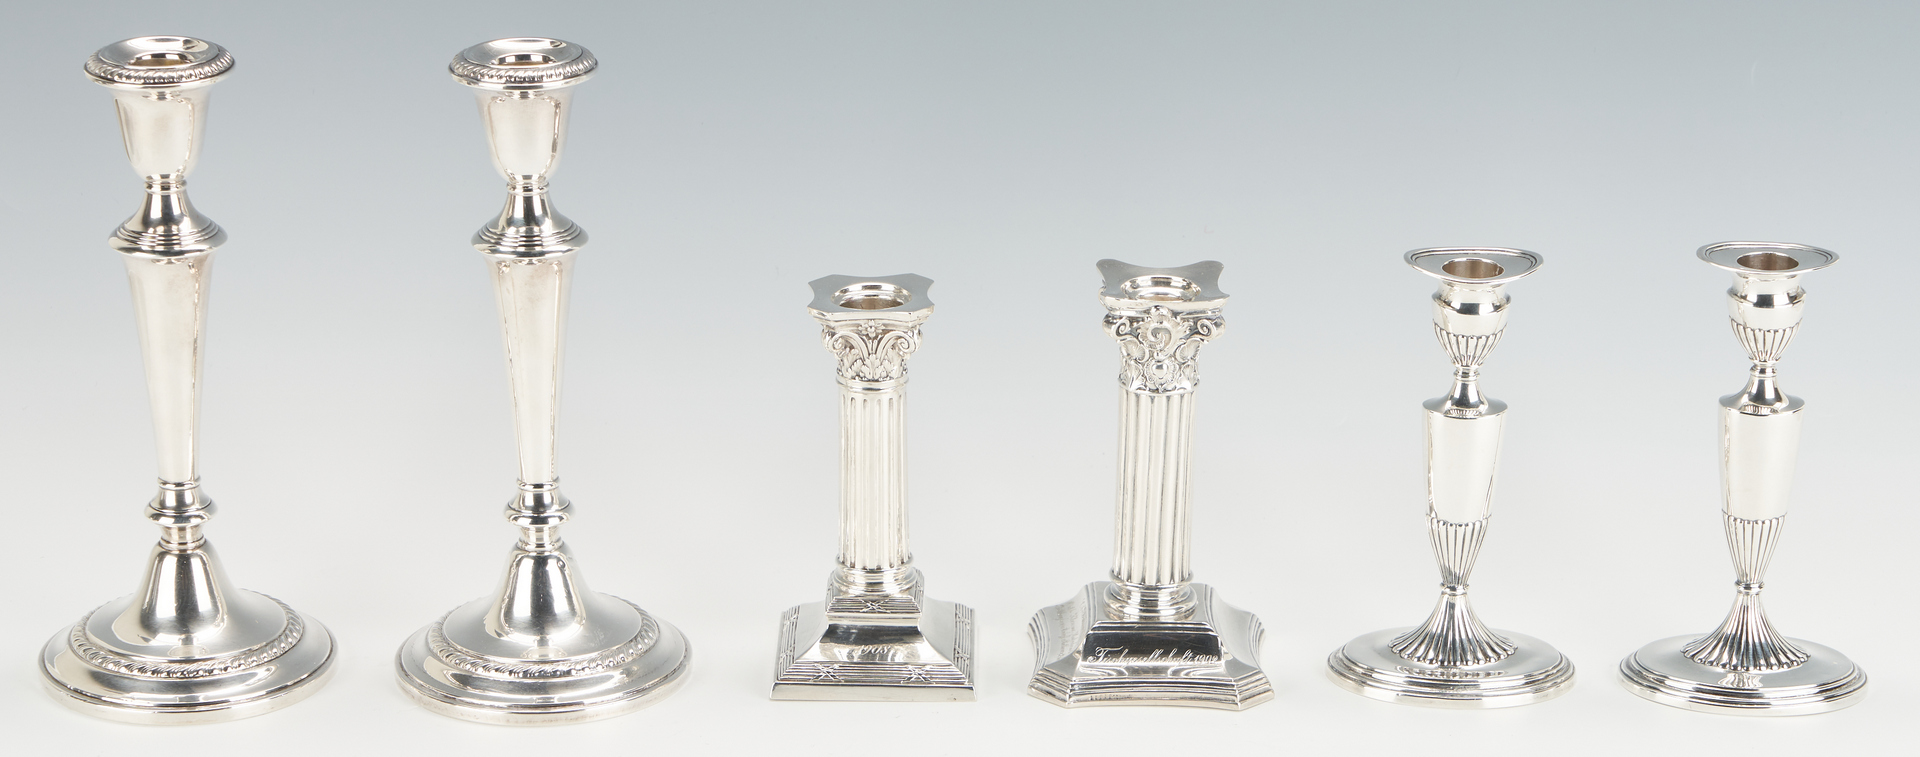 Lot 1153: 6 Silver Candlesticks plus 16 pcs. Continental Silver, Total 22 Items